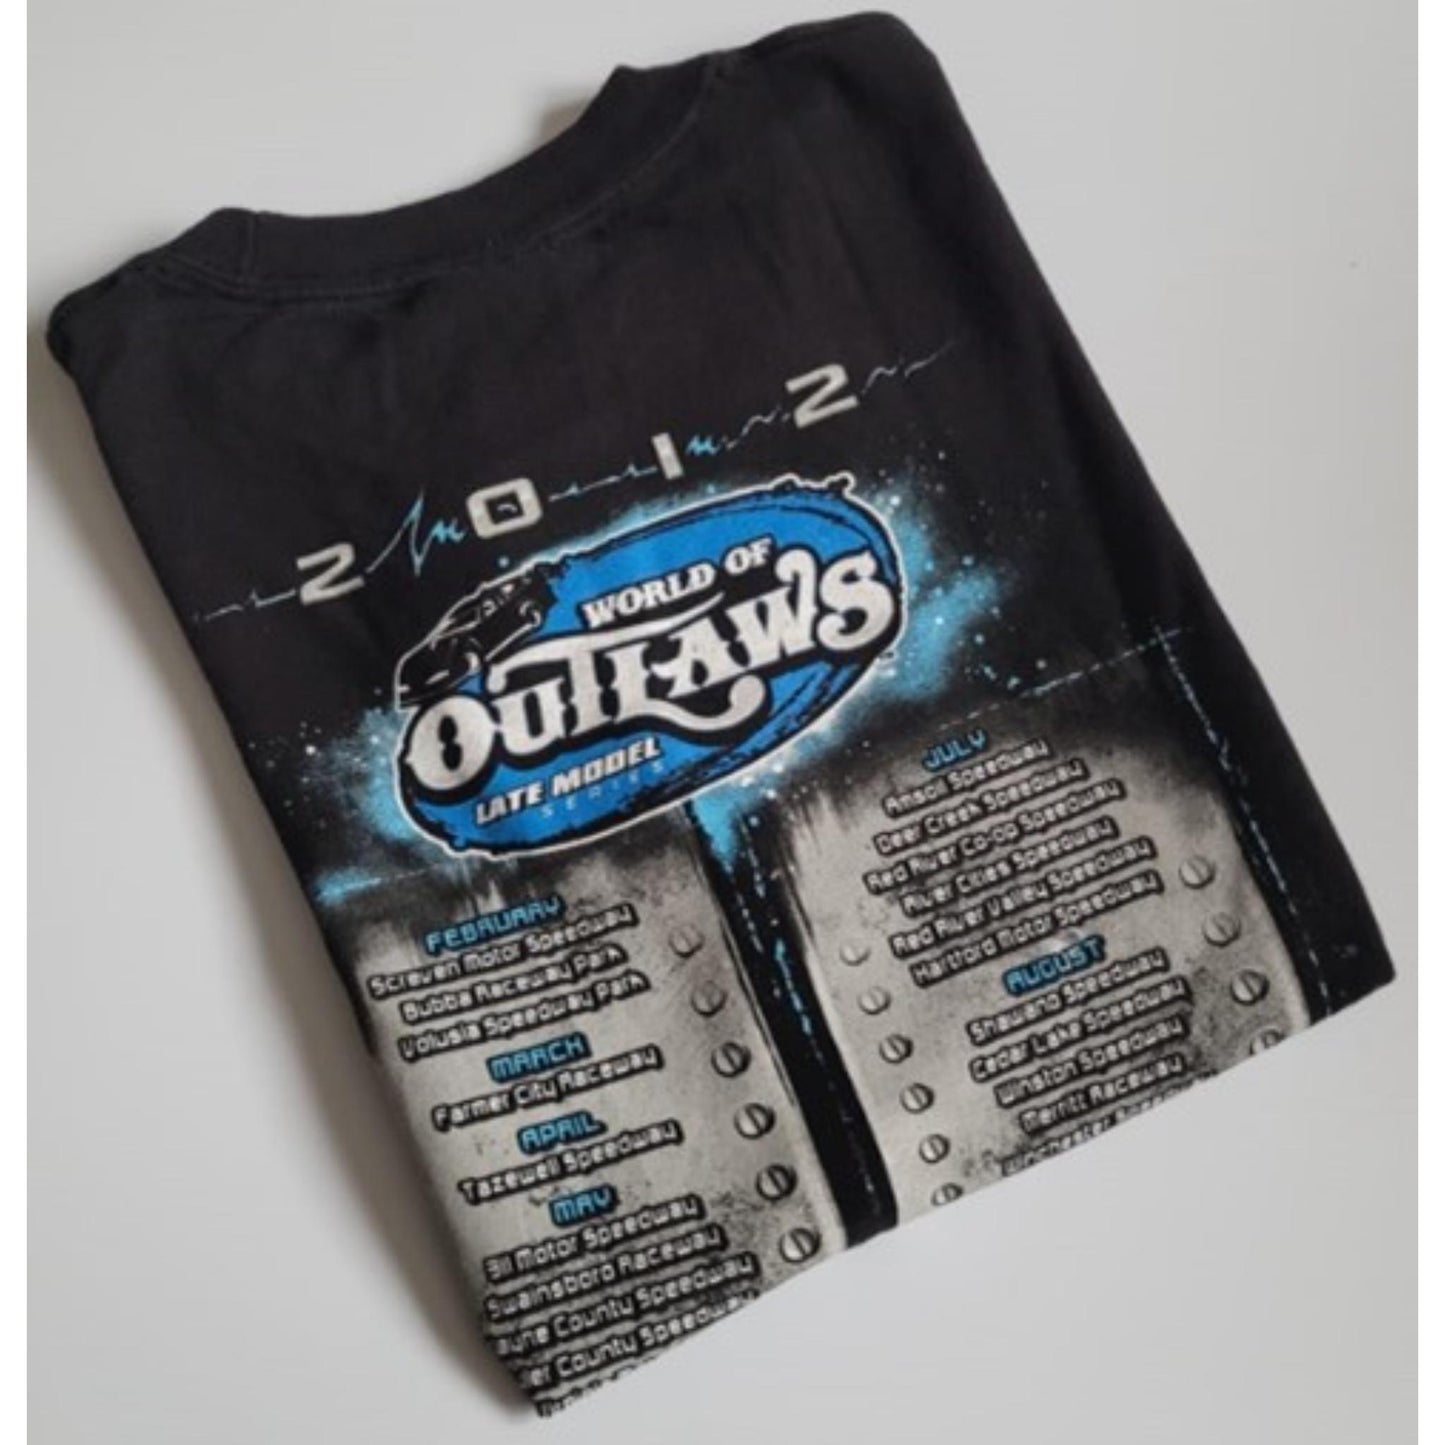 Vintage 'Outlaws' T-Shirt